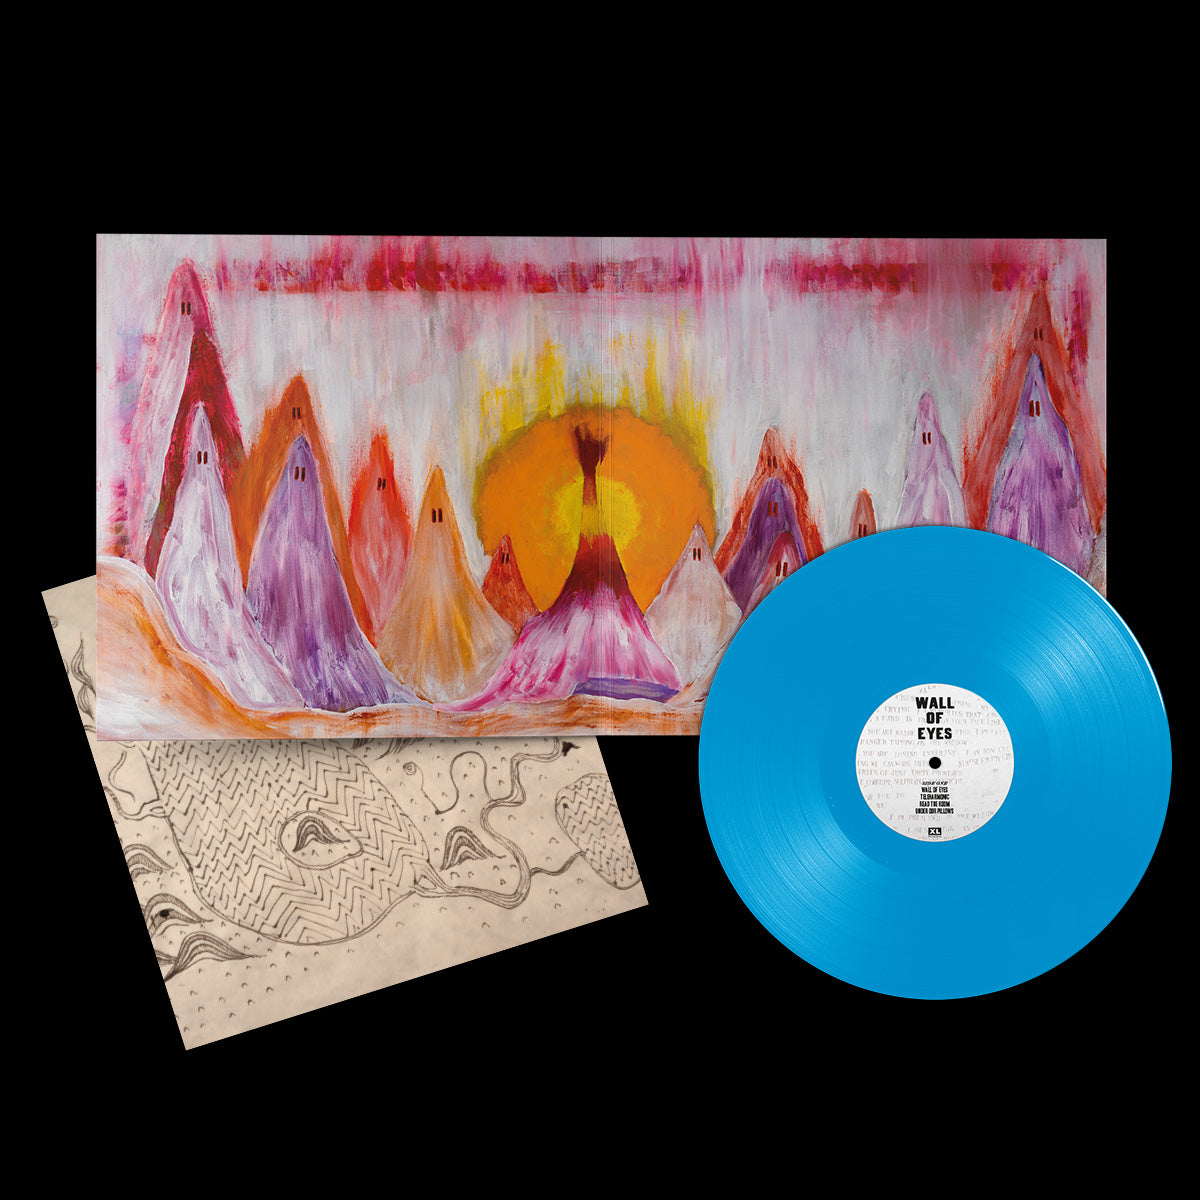 The Smile - Wall Of Eyes: Limited Sky Blue Vinyl LP